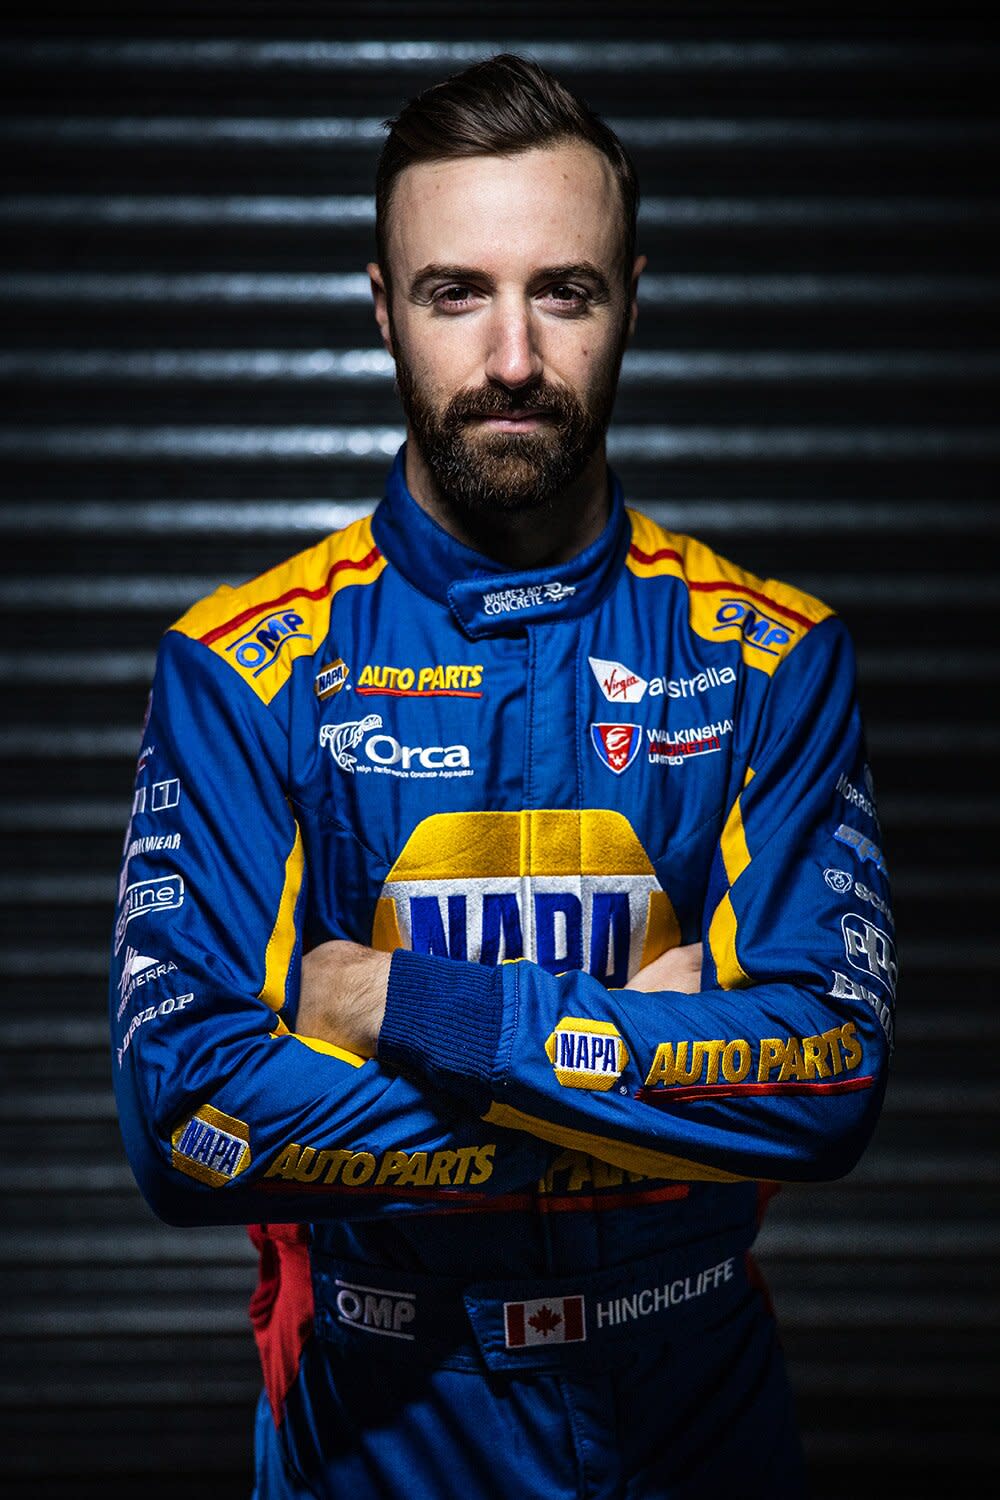 BATHURST, AUSTRALIA - OCTOBER 09: (EDITORS NOTE: Image was altered with digital filters.) James Hinchliffe driver of the #27 NAPA Auto Parts Walkinshaw Andretti United Holden Commodore ZB poses during previews ahead of the Bathurst 1000, which is part of the Supercars Championship at on October 09, 2019 in Bathurst, Australia. (Photo by Daniel Kalisz/Getty Images)